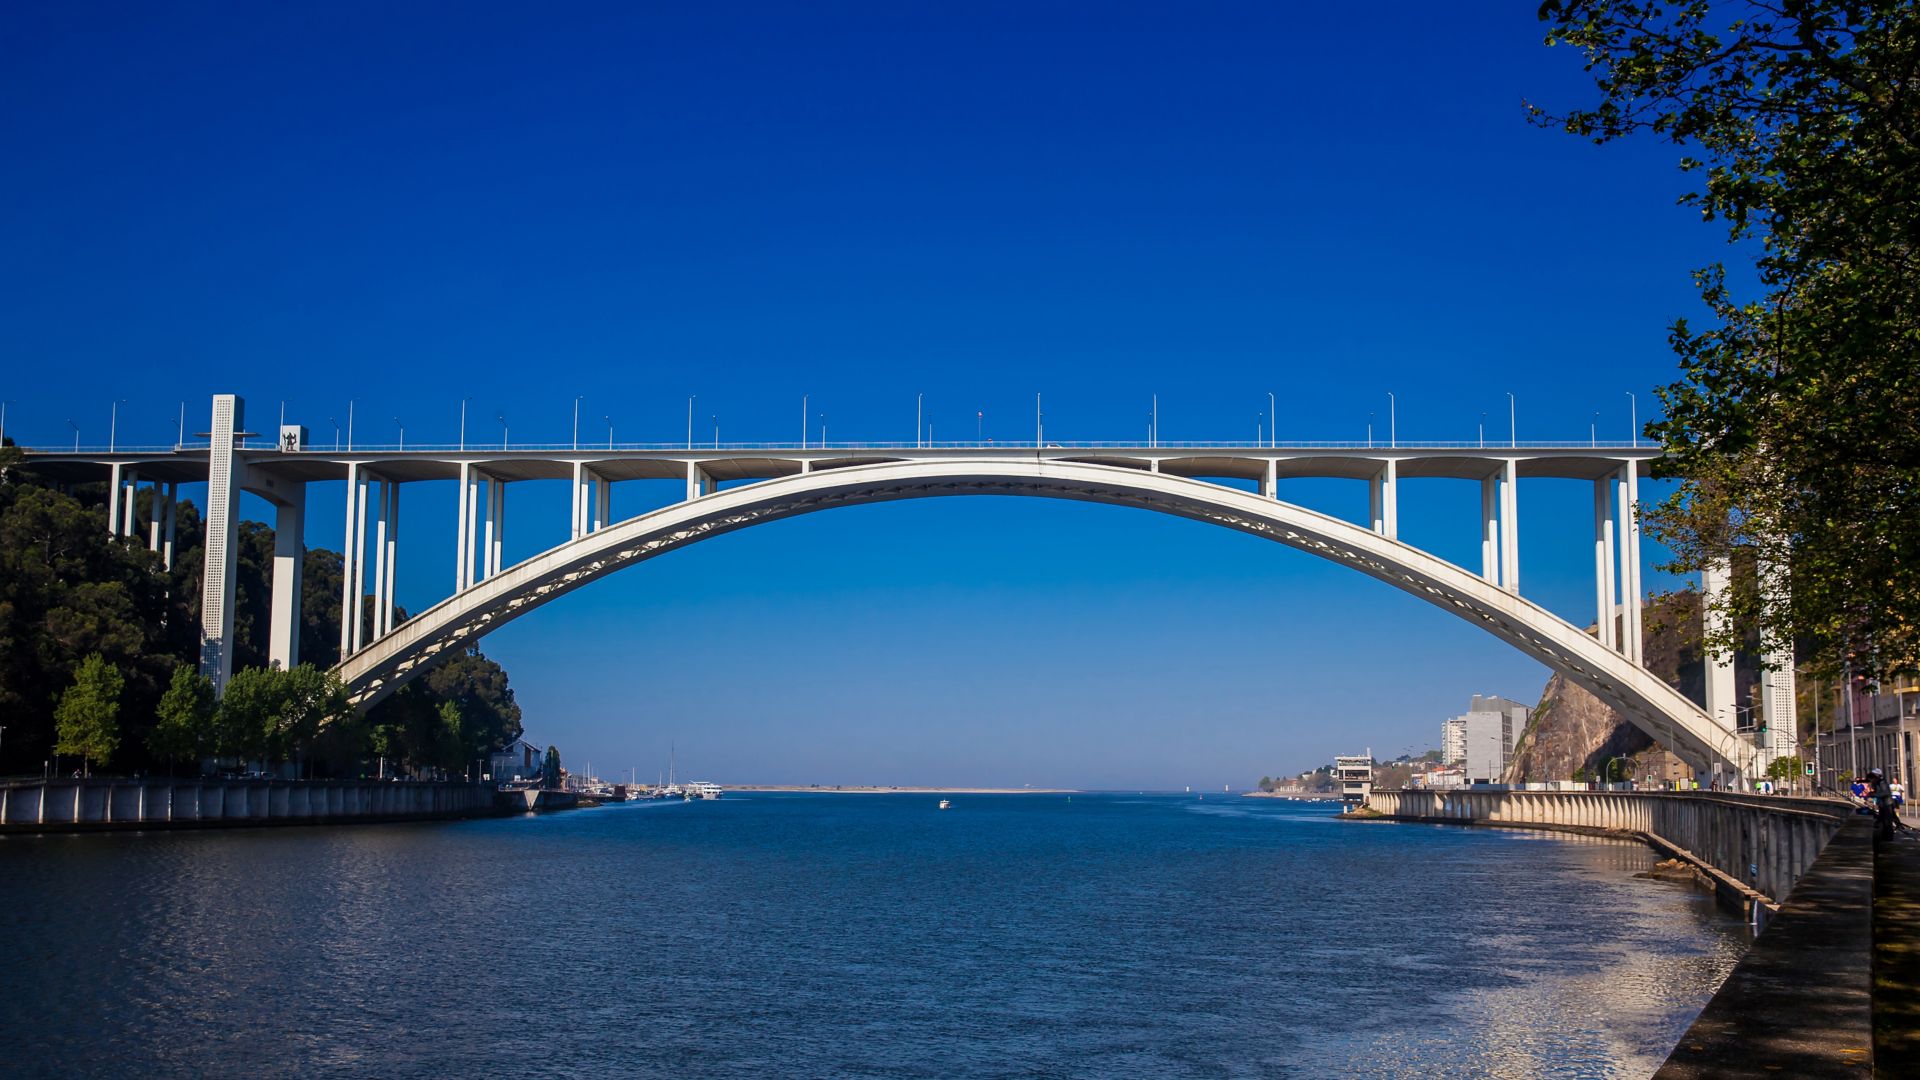 View of the Douro River mouth and the Arrabida Bridge in a beautiful early spring day at Porto City in Portugal